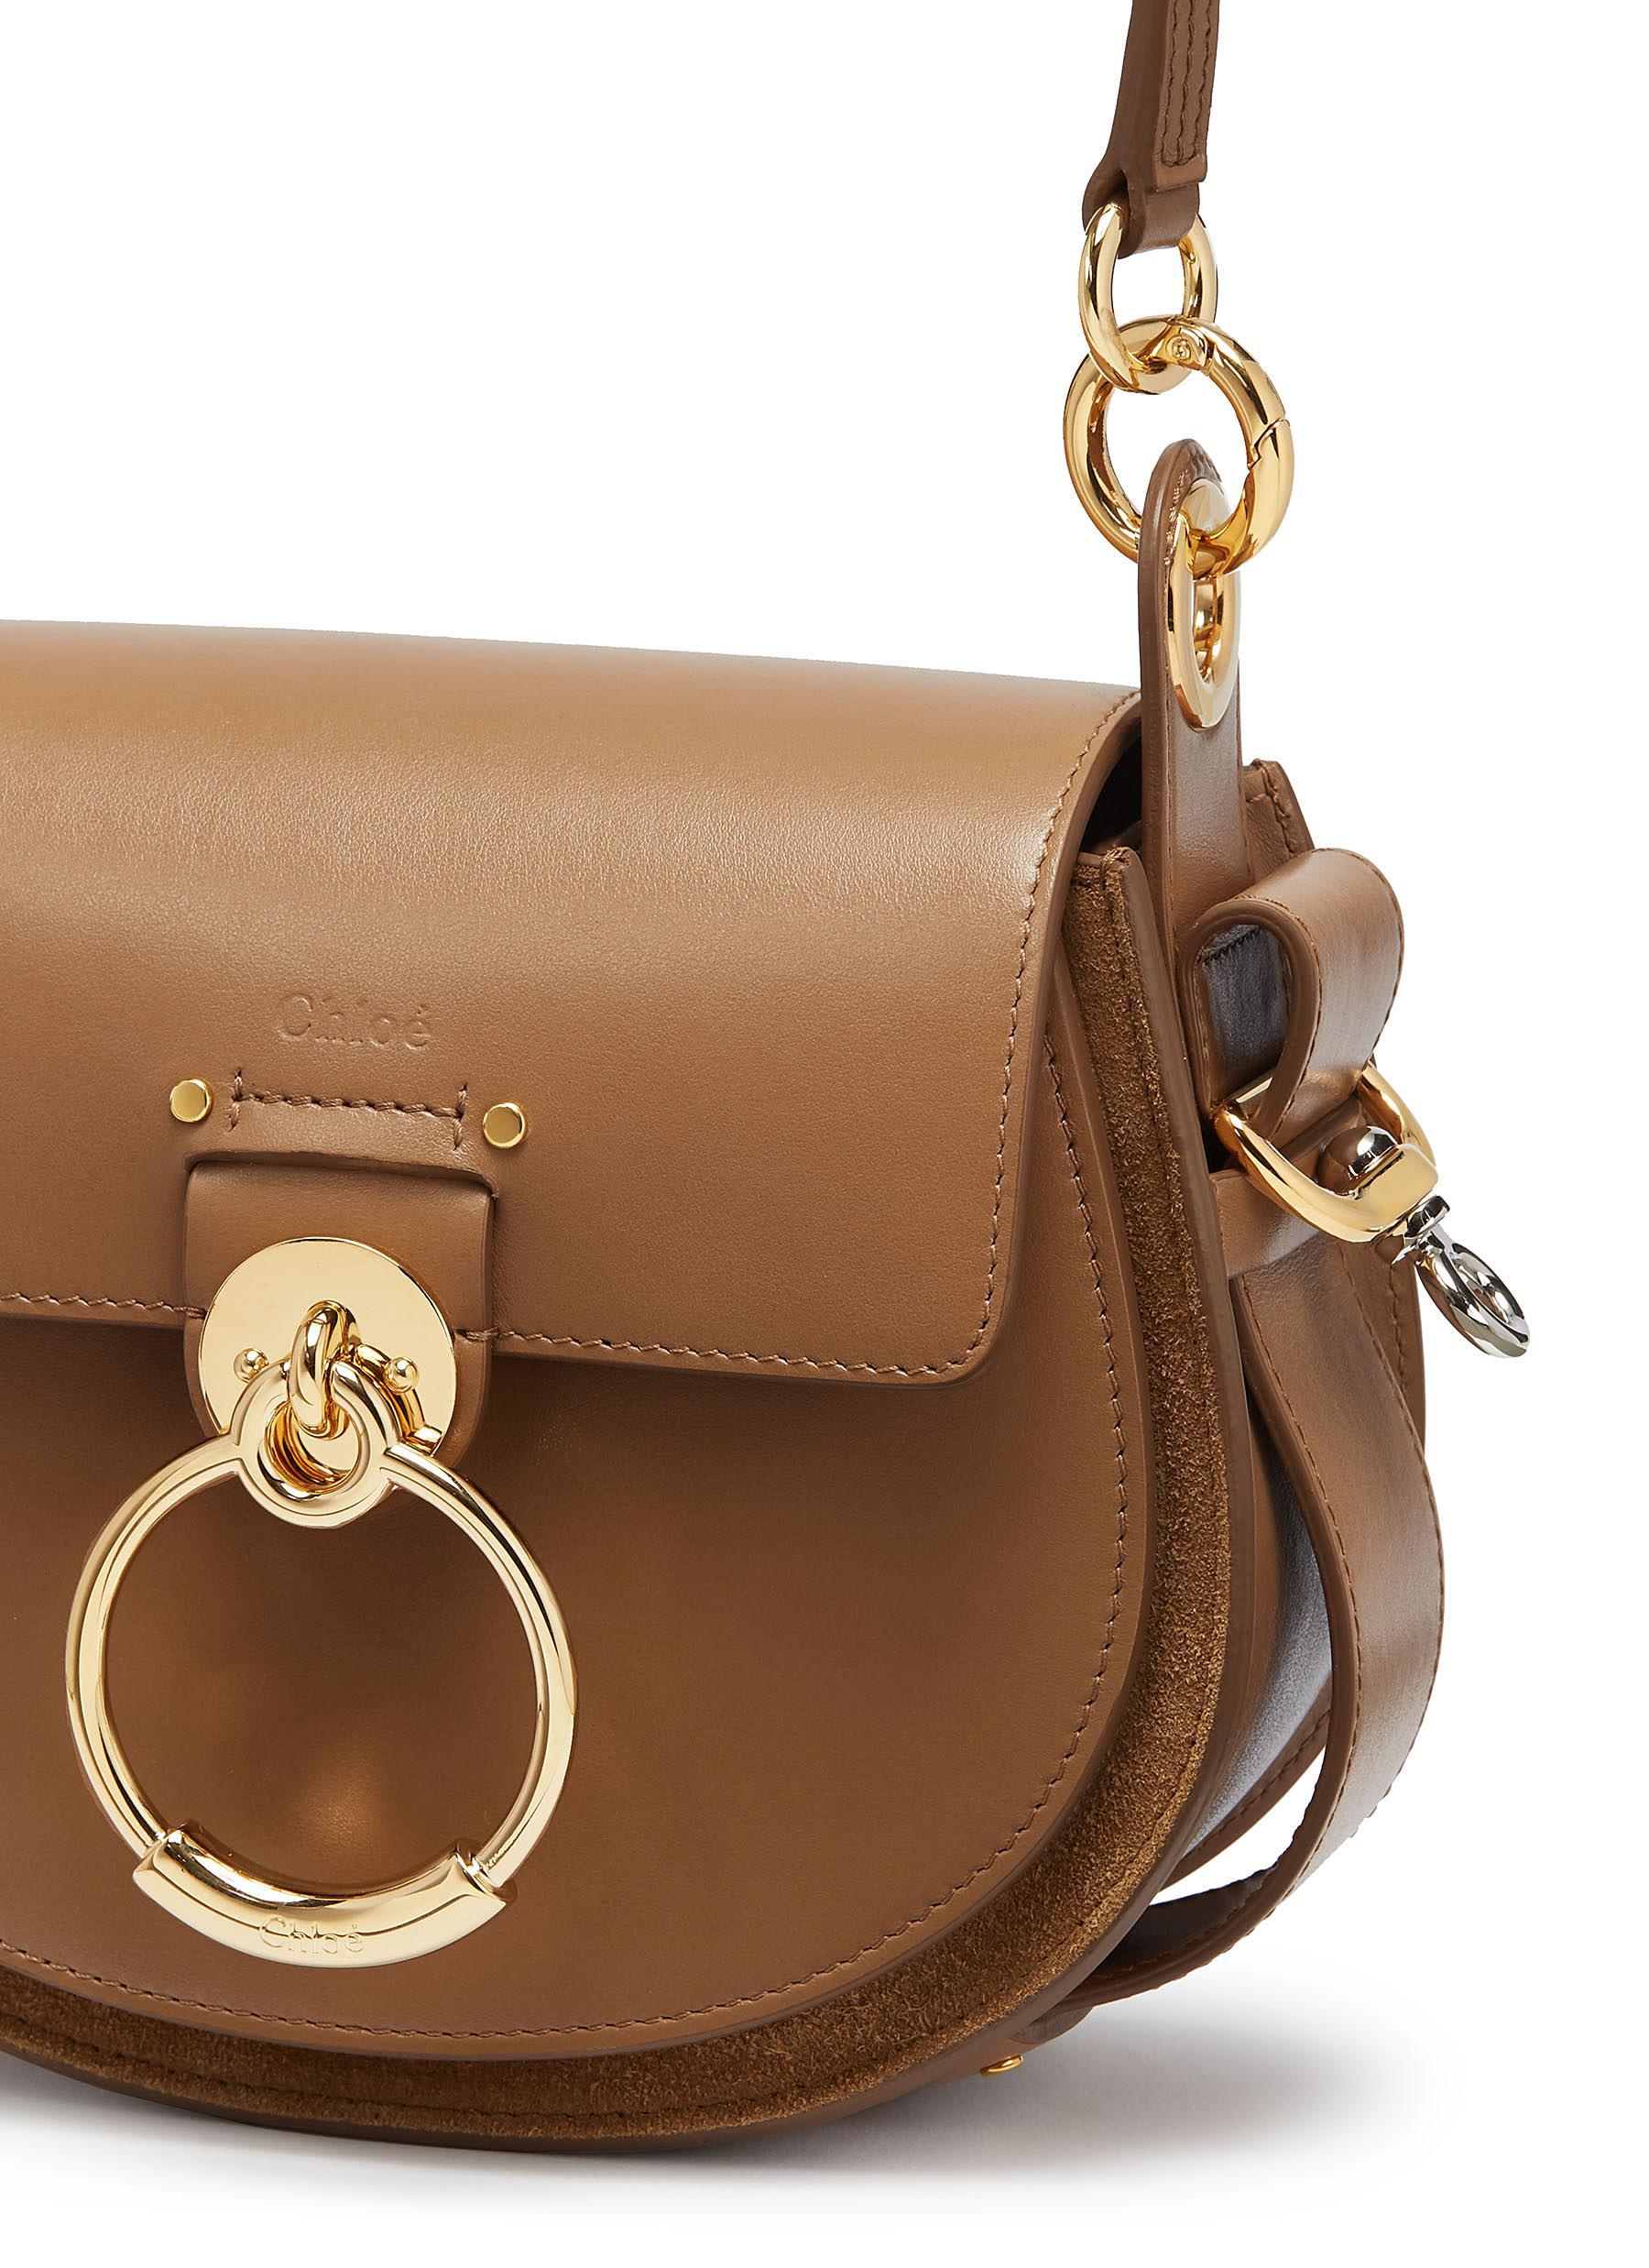 Chloé 'tess' Ring Small Leather Shoulder Bag in Brown - Lyst